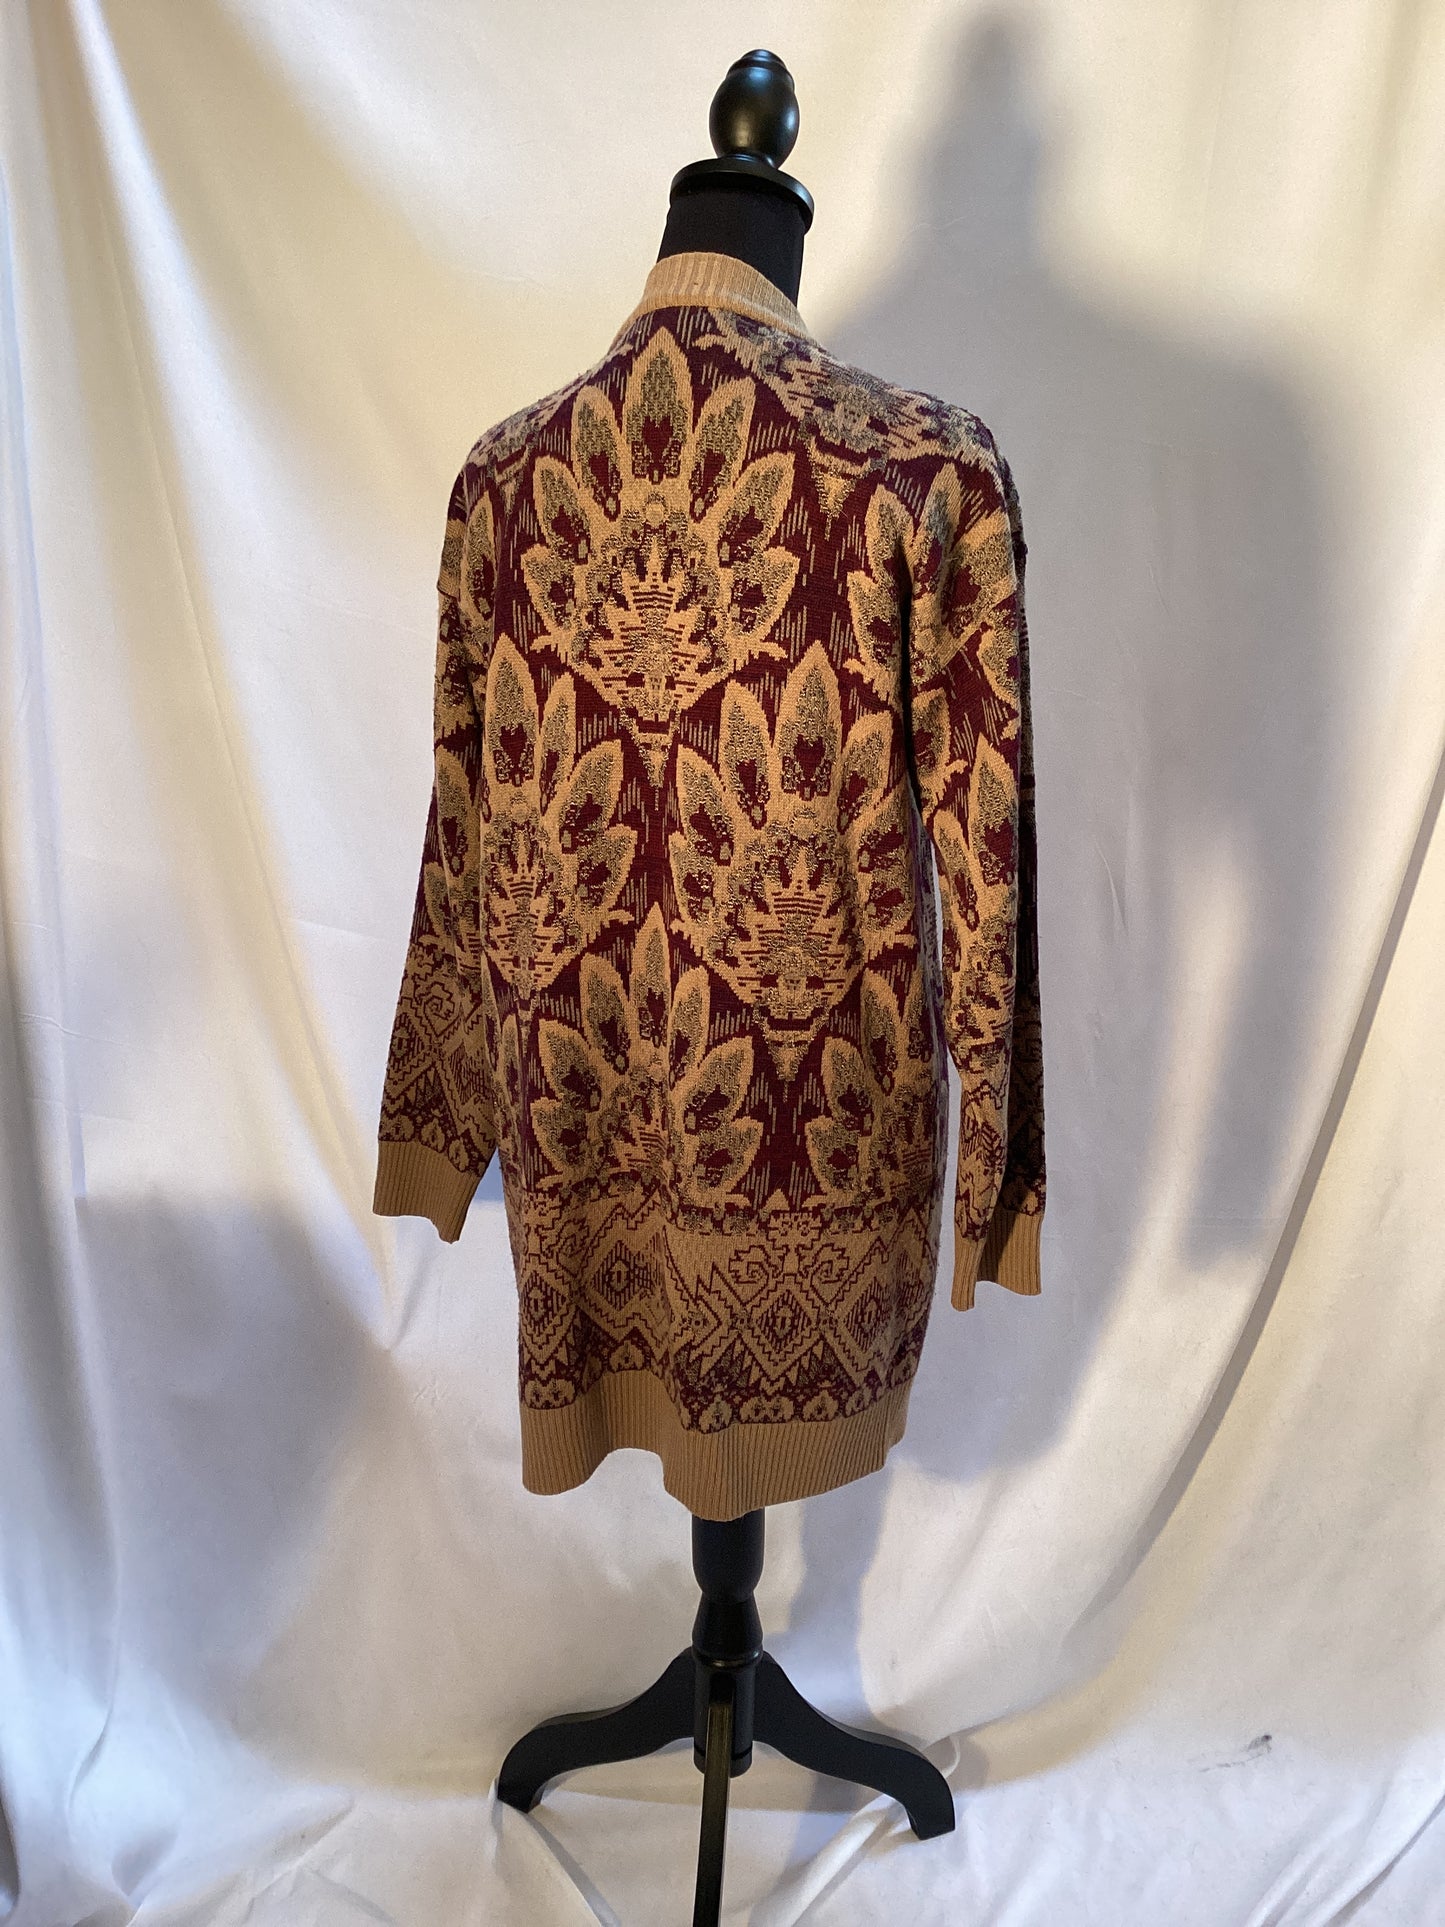 Merino wool, rayon and acrylic brown print sweater by Laura Johnson for foxcroft